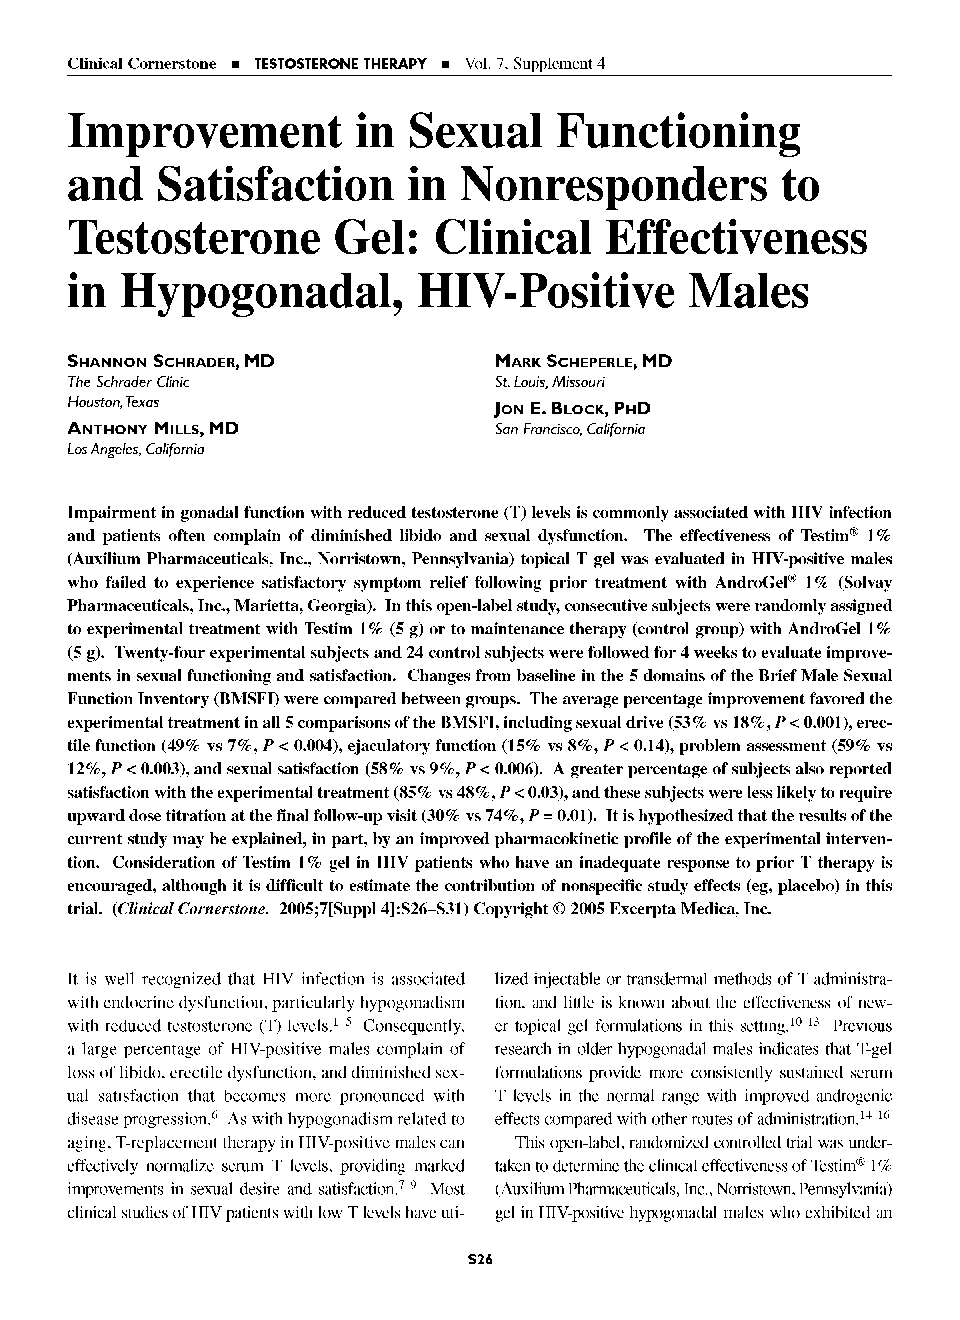 Improvement in sexual functioning and satisfaction in nonresponders to testosterone gel: Clinical effectiveness in hypogonadal, HIV-positive males